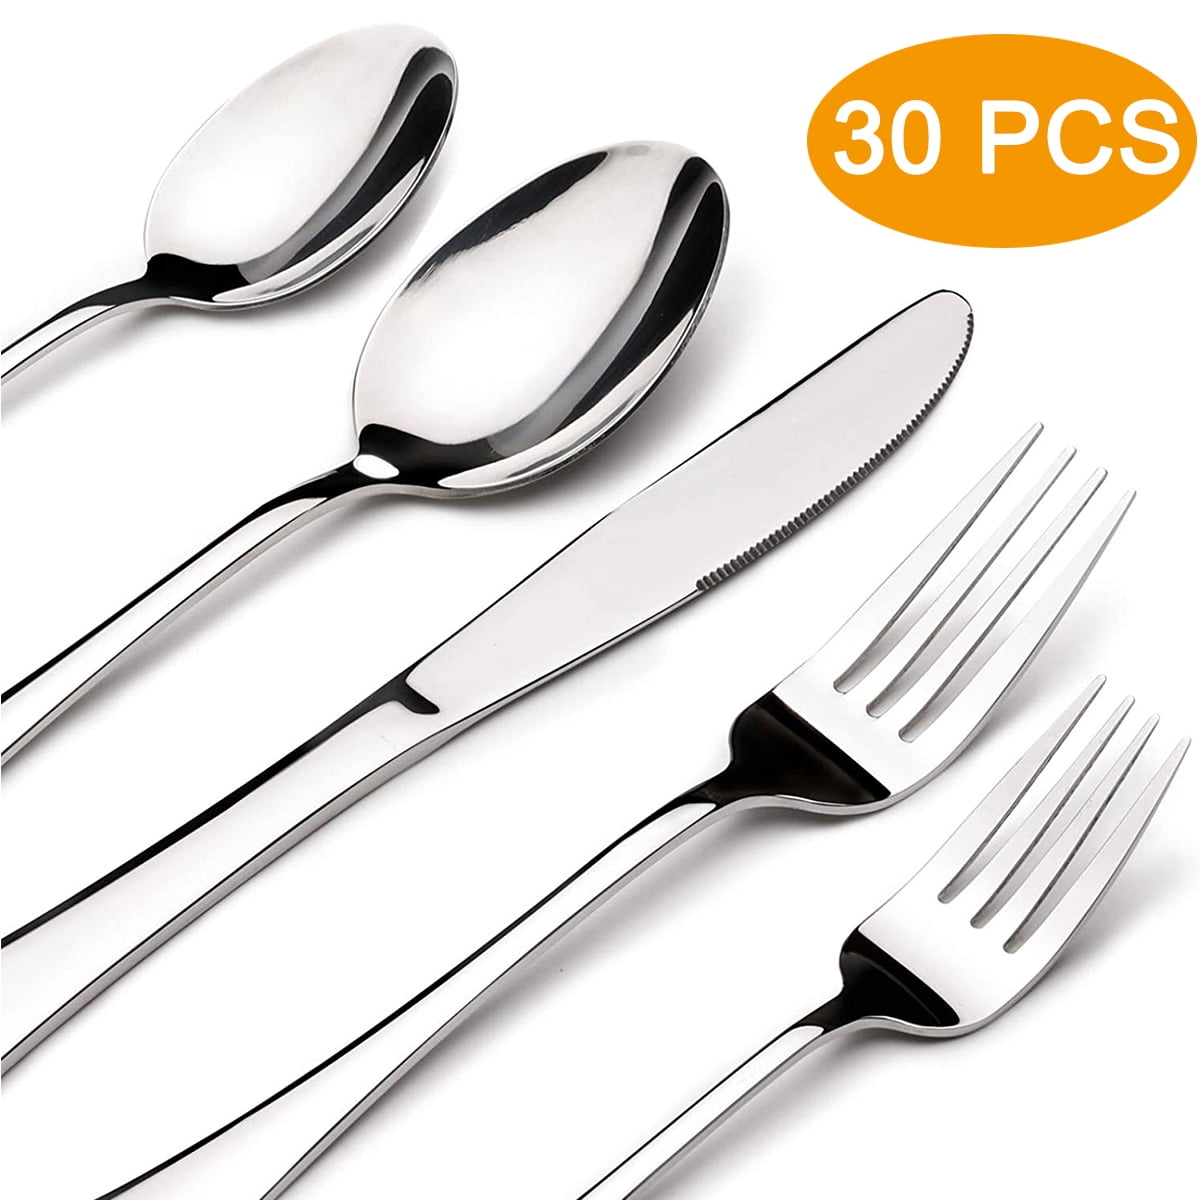 Dinner Spoons Set of 6 Black Flatware Replacement 18/10 Stainless Steel Heavy Duty Silverware Spoon Bulk Dishwasher Safe 8-inch Eating Utensils Sets 6-Piece Table Spoons Mirror Finished 